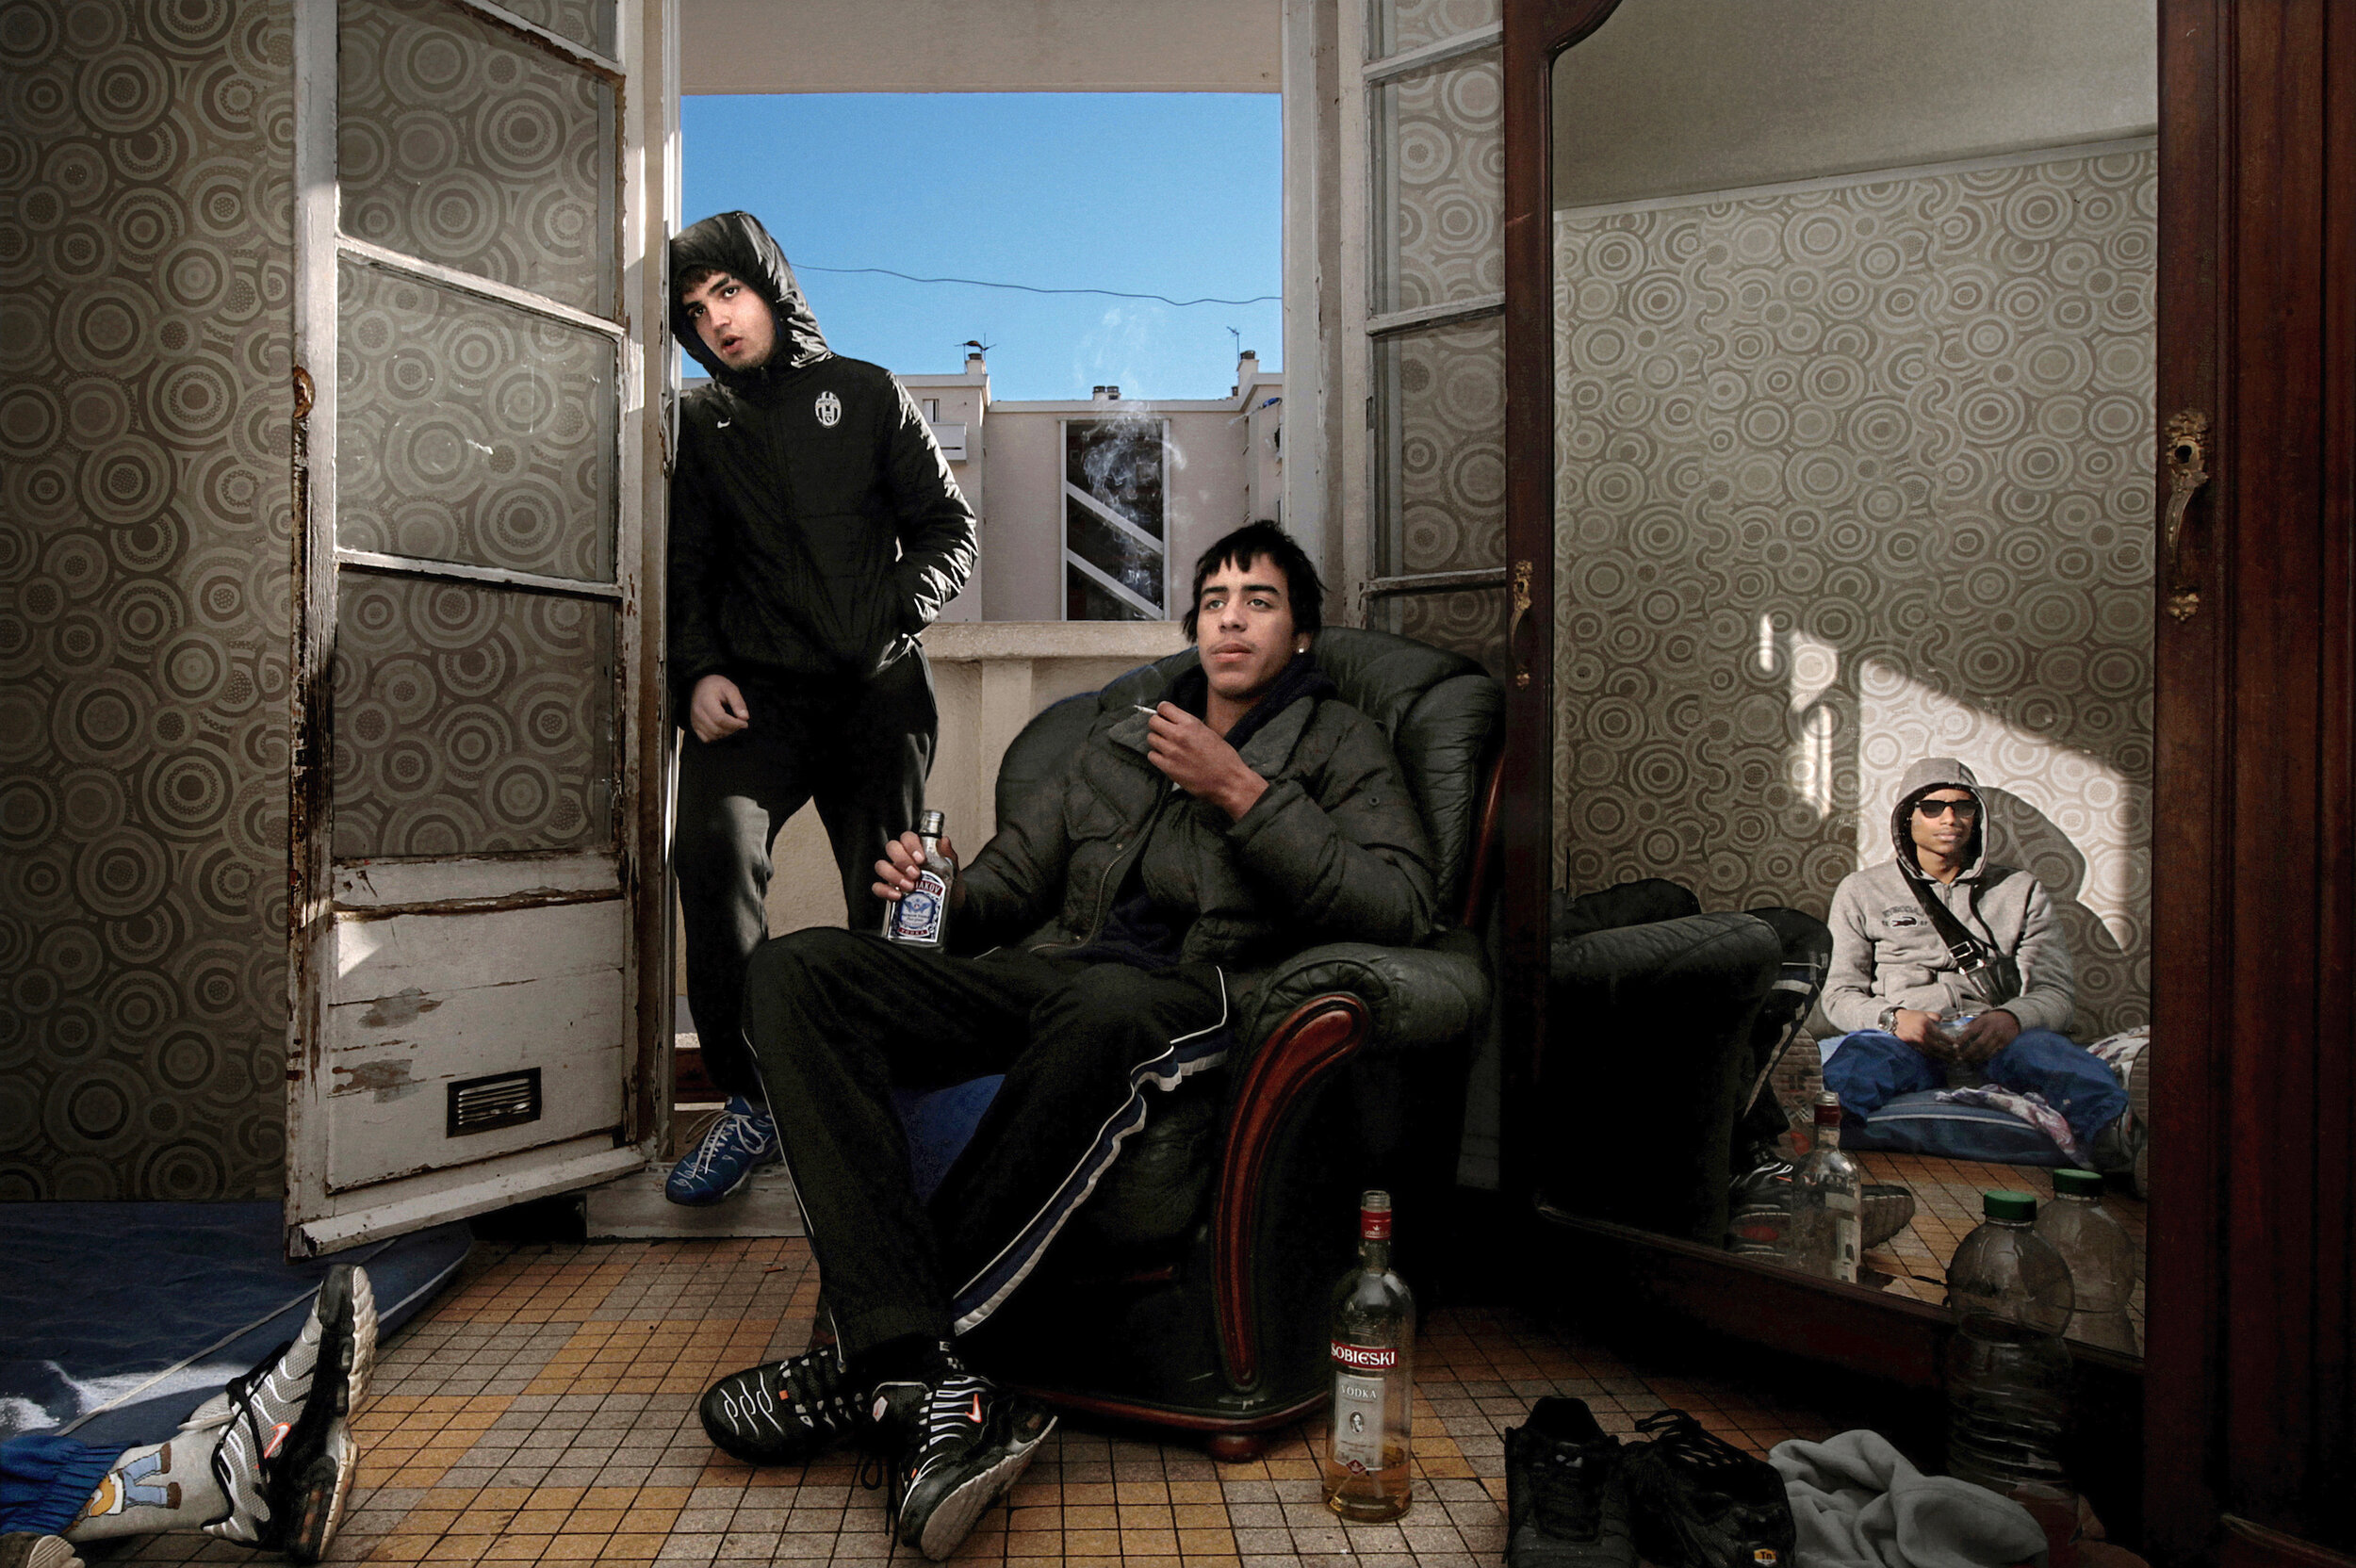   France. Marseille. 2013. Squatting in a social housing apartment, young men watch a soccer match on TV.        